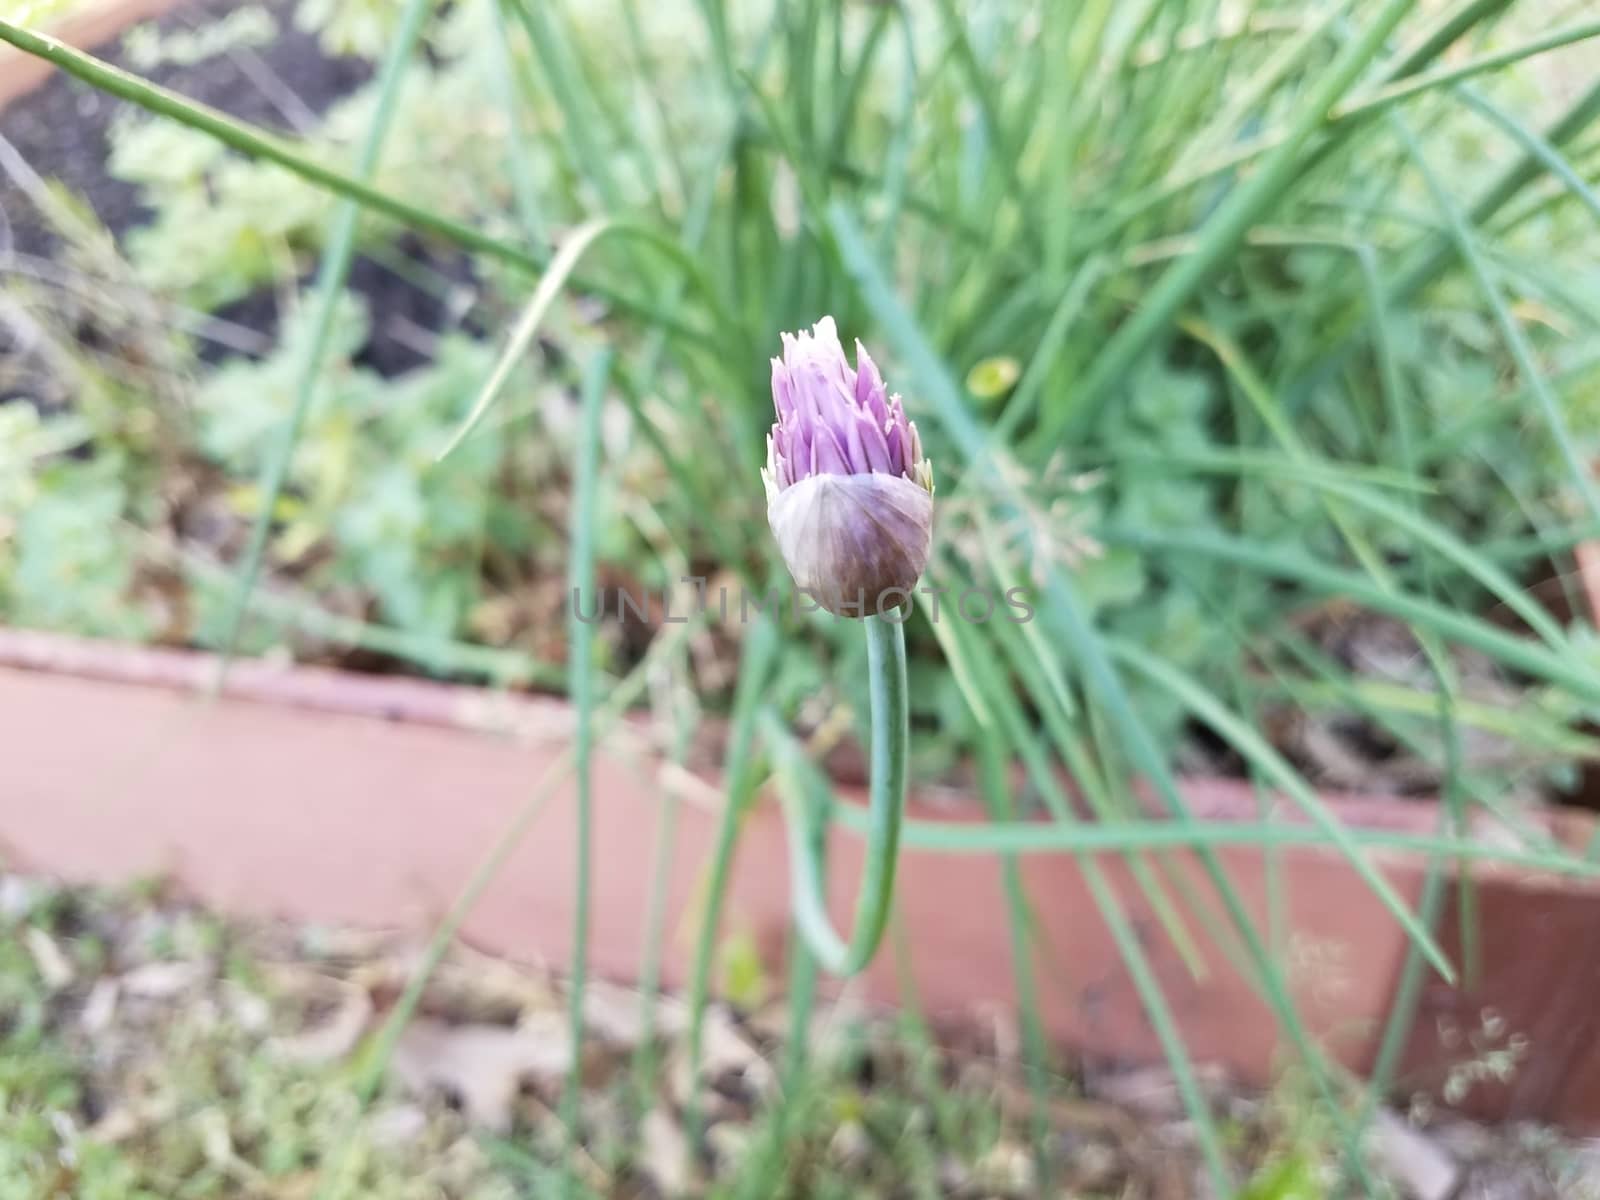 purple flower on green chive or onion plant in dirt or soil in garden